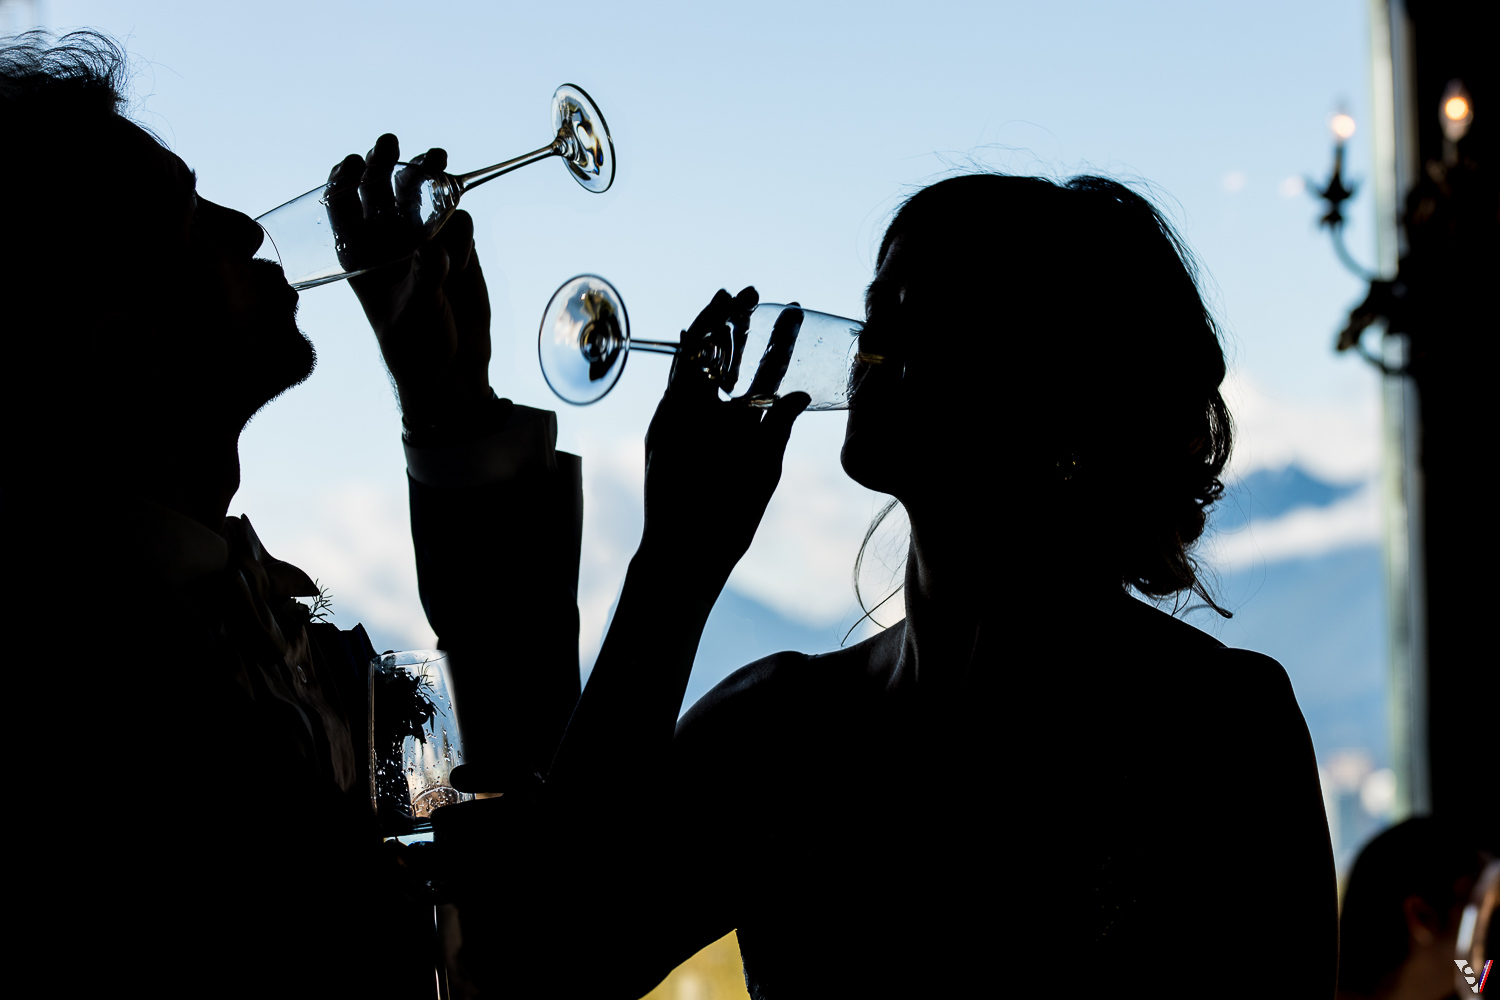 Artistic couple photo with Champagne flutes